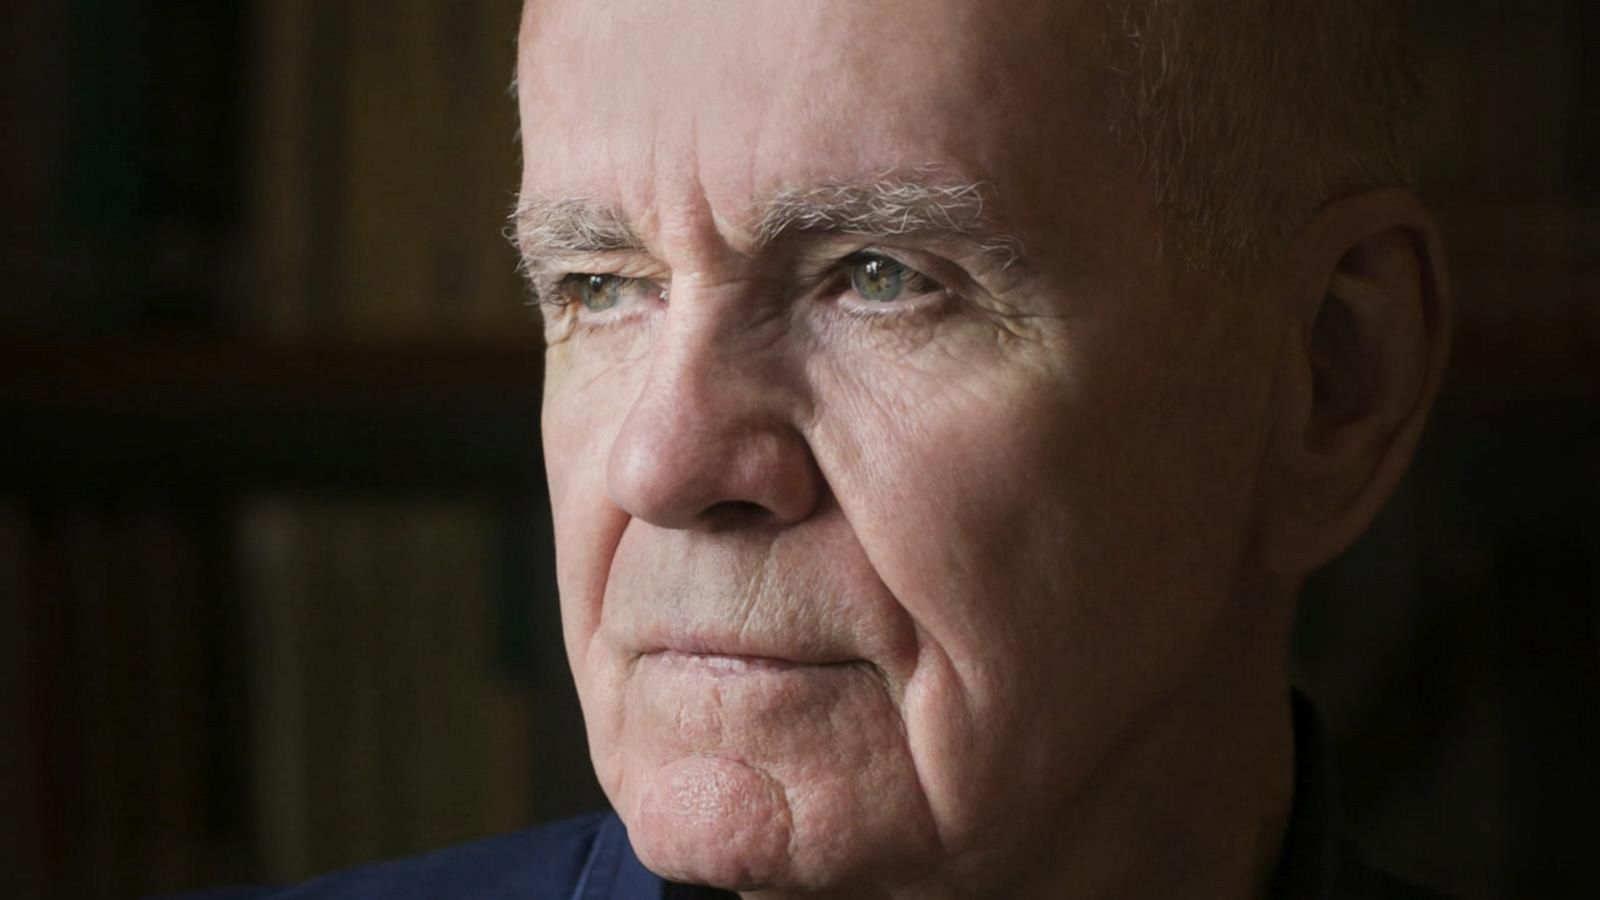 Celebrating the life of author Cormac McCarthy - Good Morning America